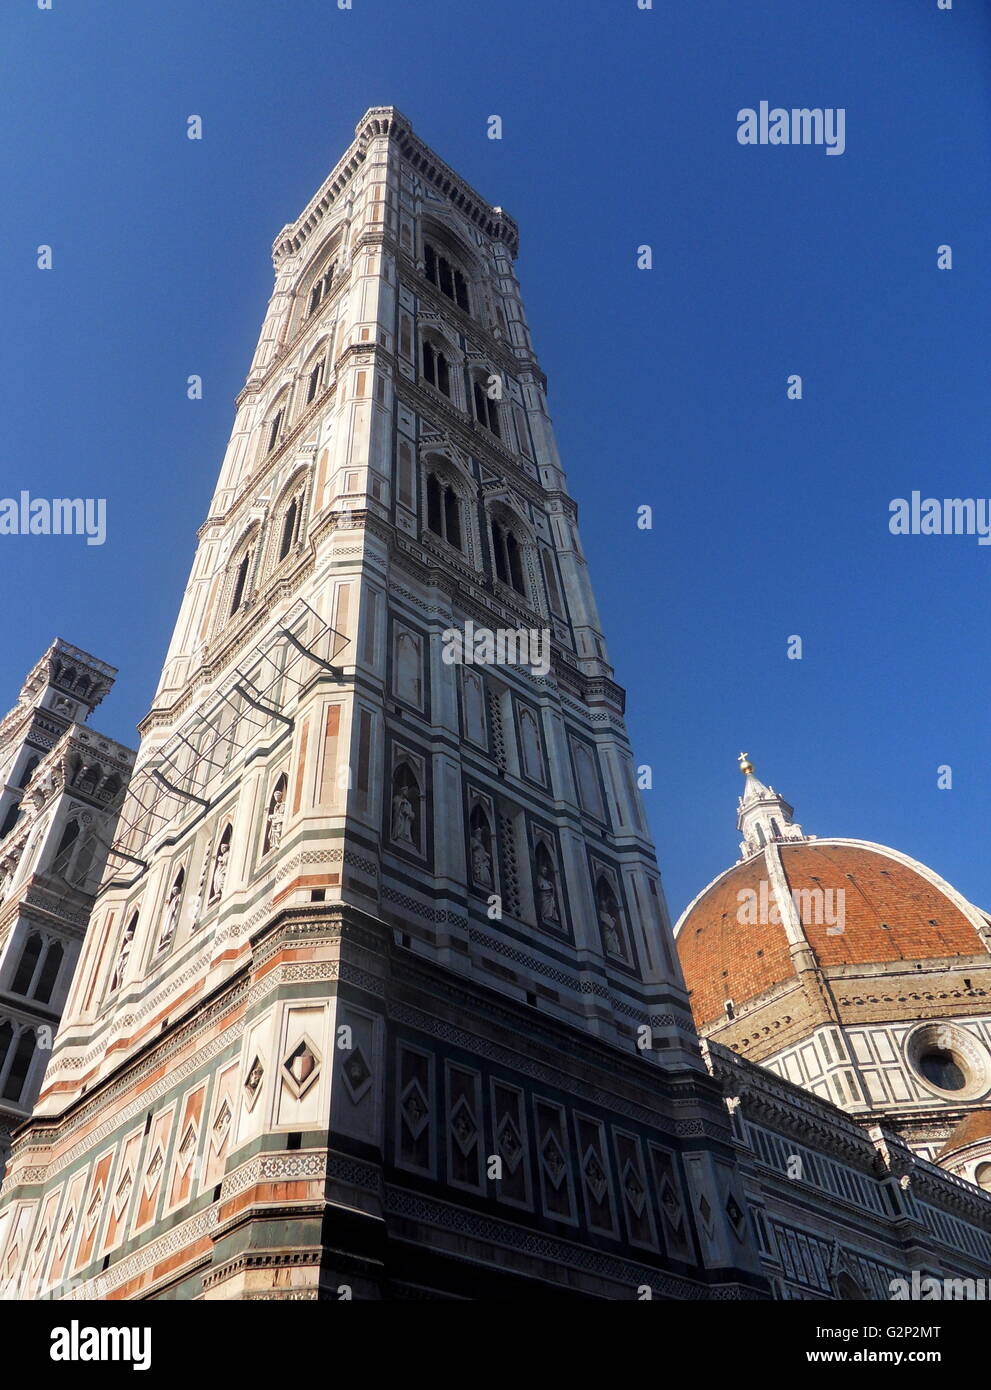 The tower from the Basilica di Santa Maria del Fiore, a building more commonly known as the 'Duomo'. Florence, Italy. Started in 1296 based on Arnolfo di Cambio's design, but was not complete until 1436 when Filippo Brunelleschi engineered the dome. One of Italy's largest churches. Stock Photo